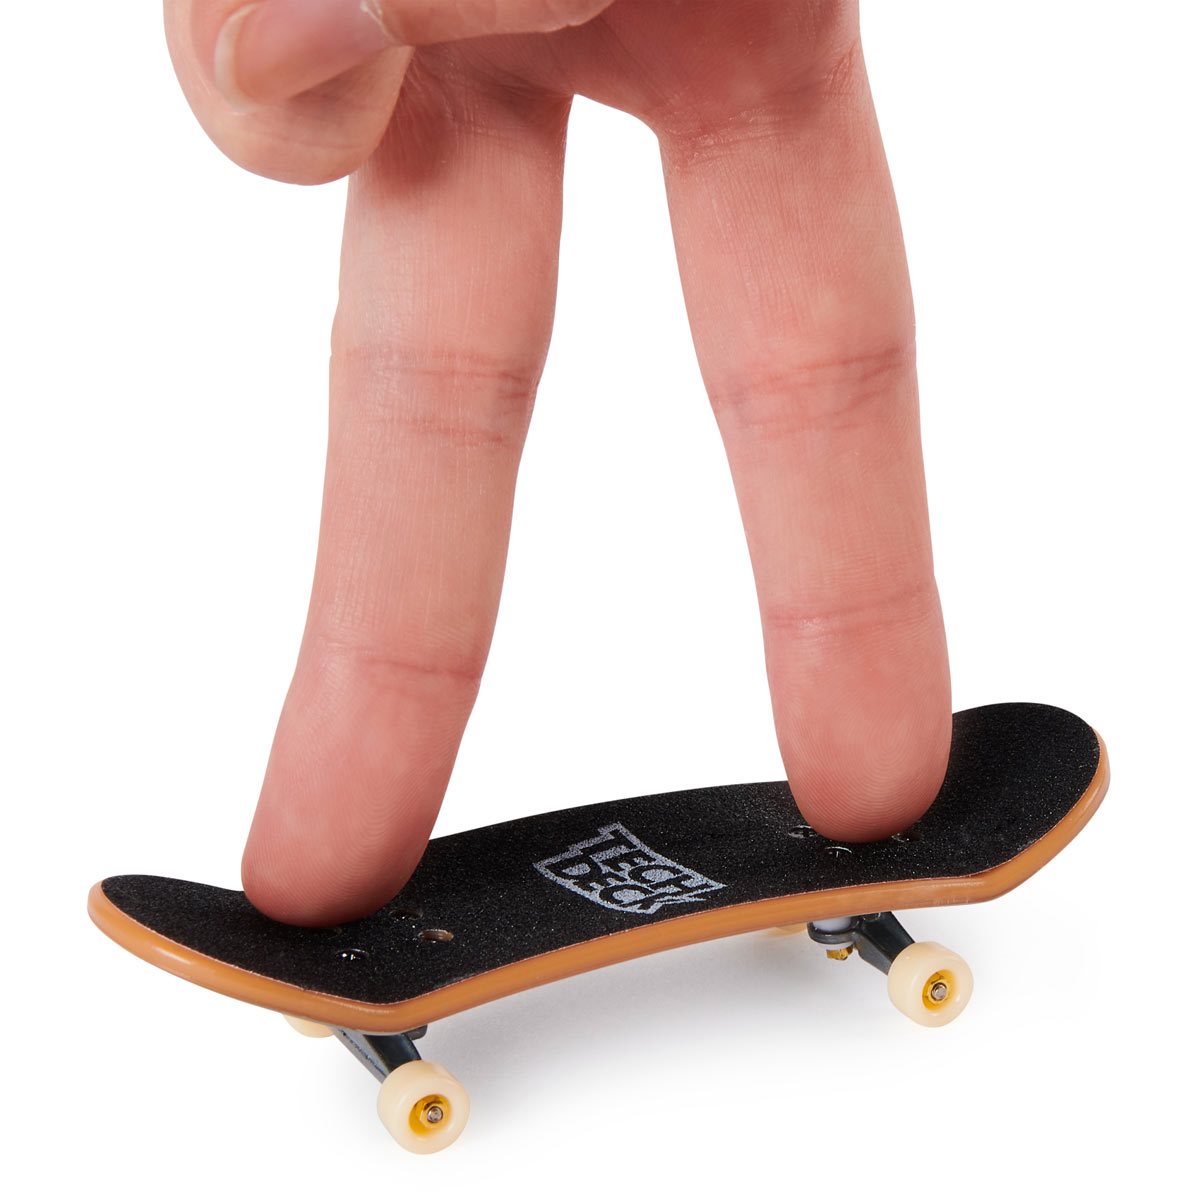 TECH DECK, Play and Display Transforming Ramp Set and Carrying Case with  Exclusive Fingerboard, Kids Toy for Ages 6 and up